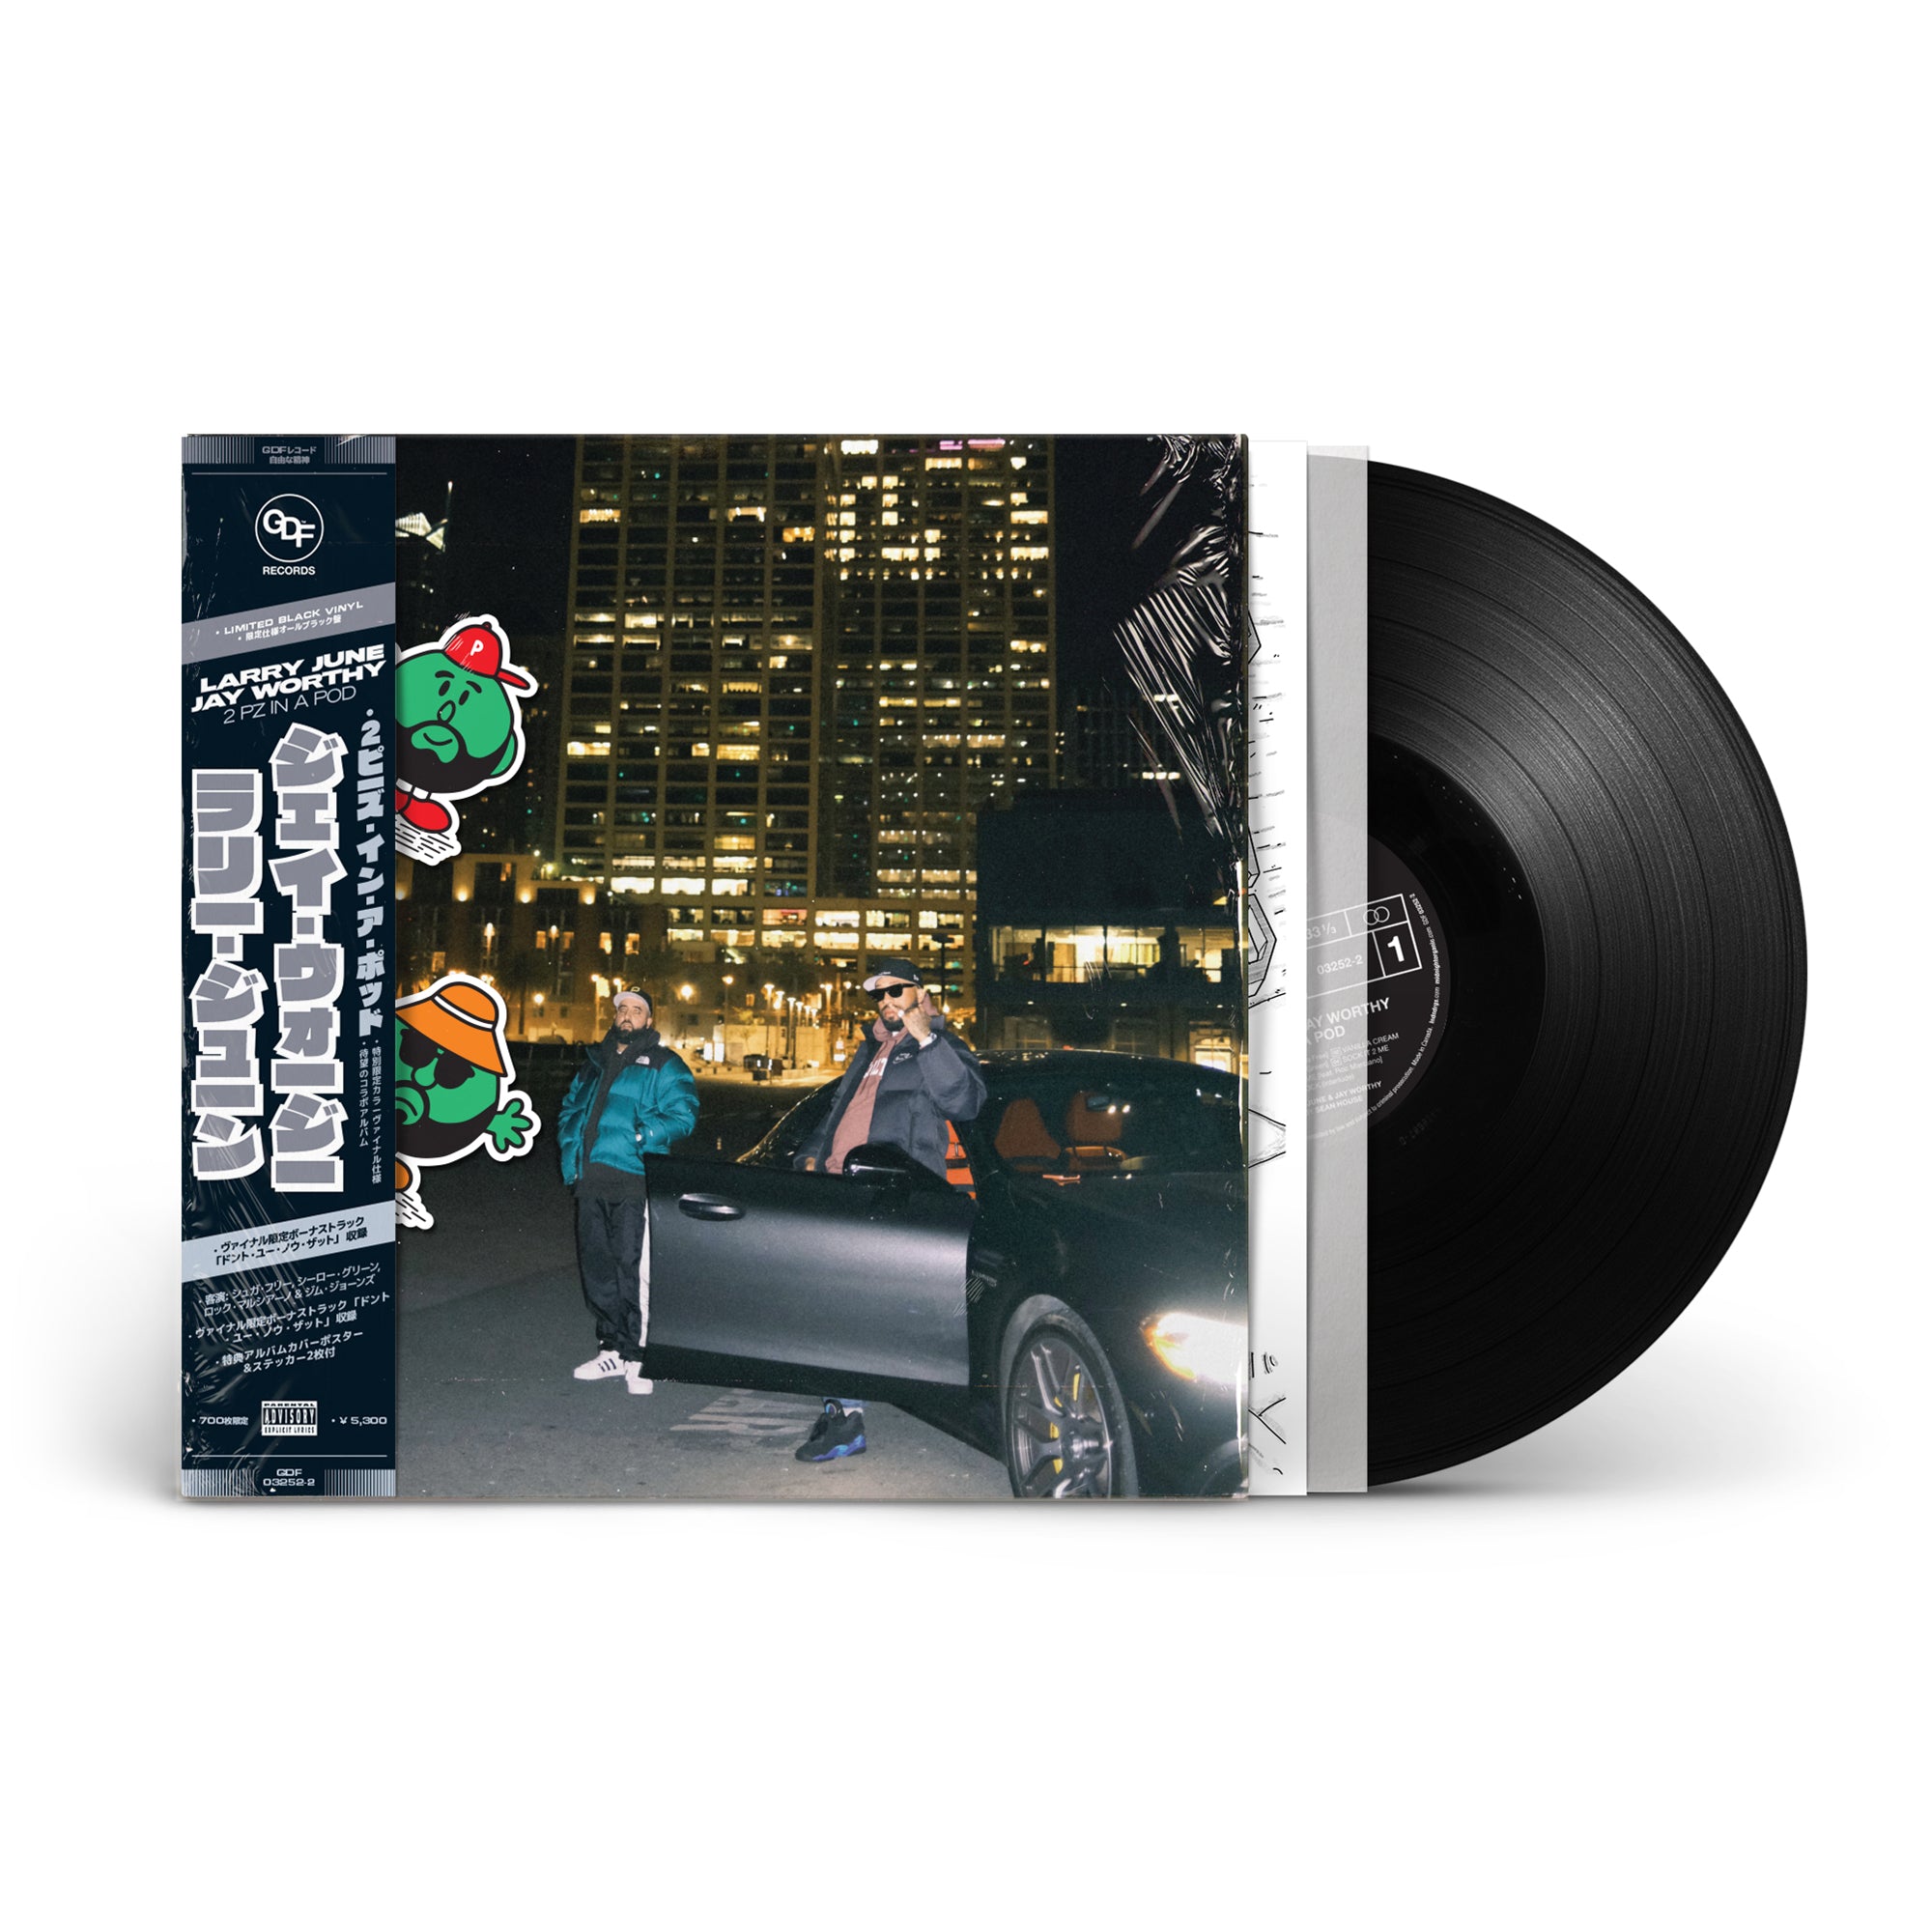 Larry June & Jay Worthy '2 P'z In A Pod' Limited Edition Deluxe Black Vinyl w/ Obi Strip, Stickers & Poster